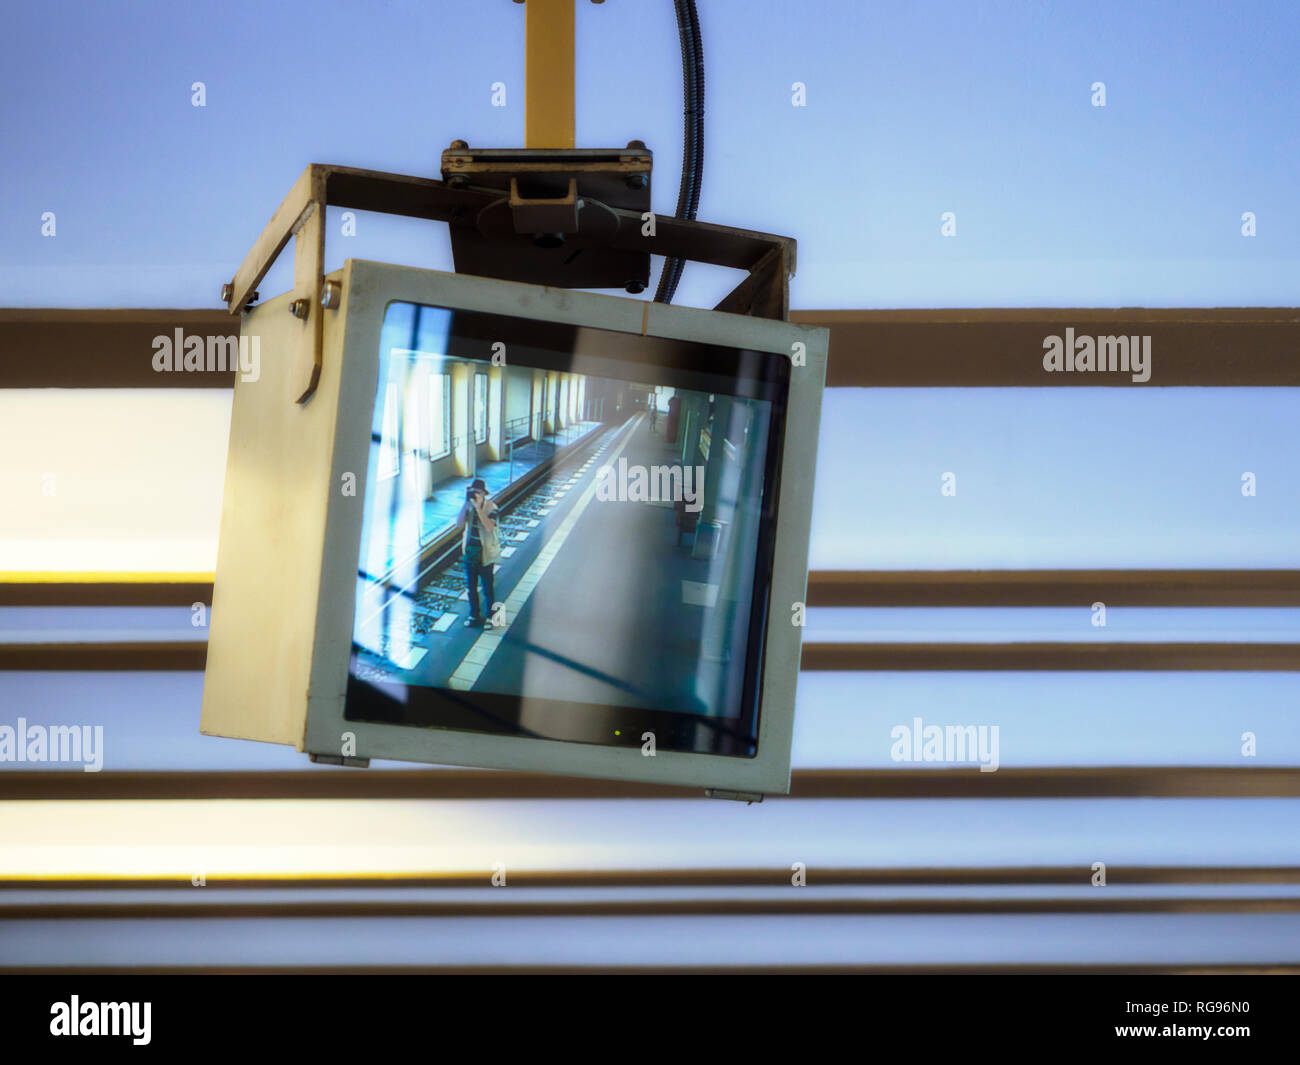 Germany, Berlin, Screen from video surveillance, photograper at S-bahn station Stock Photo